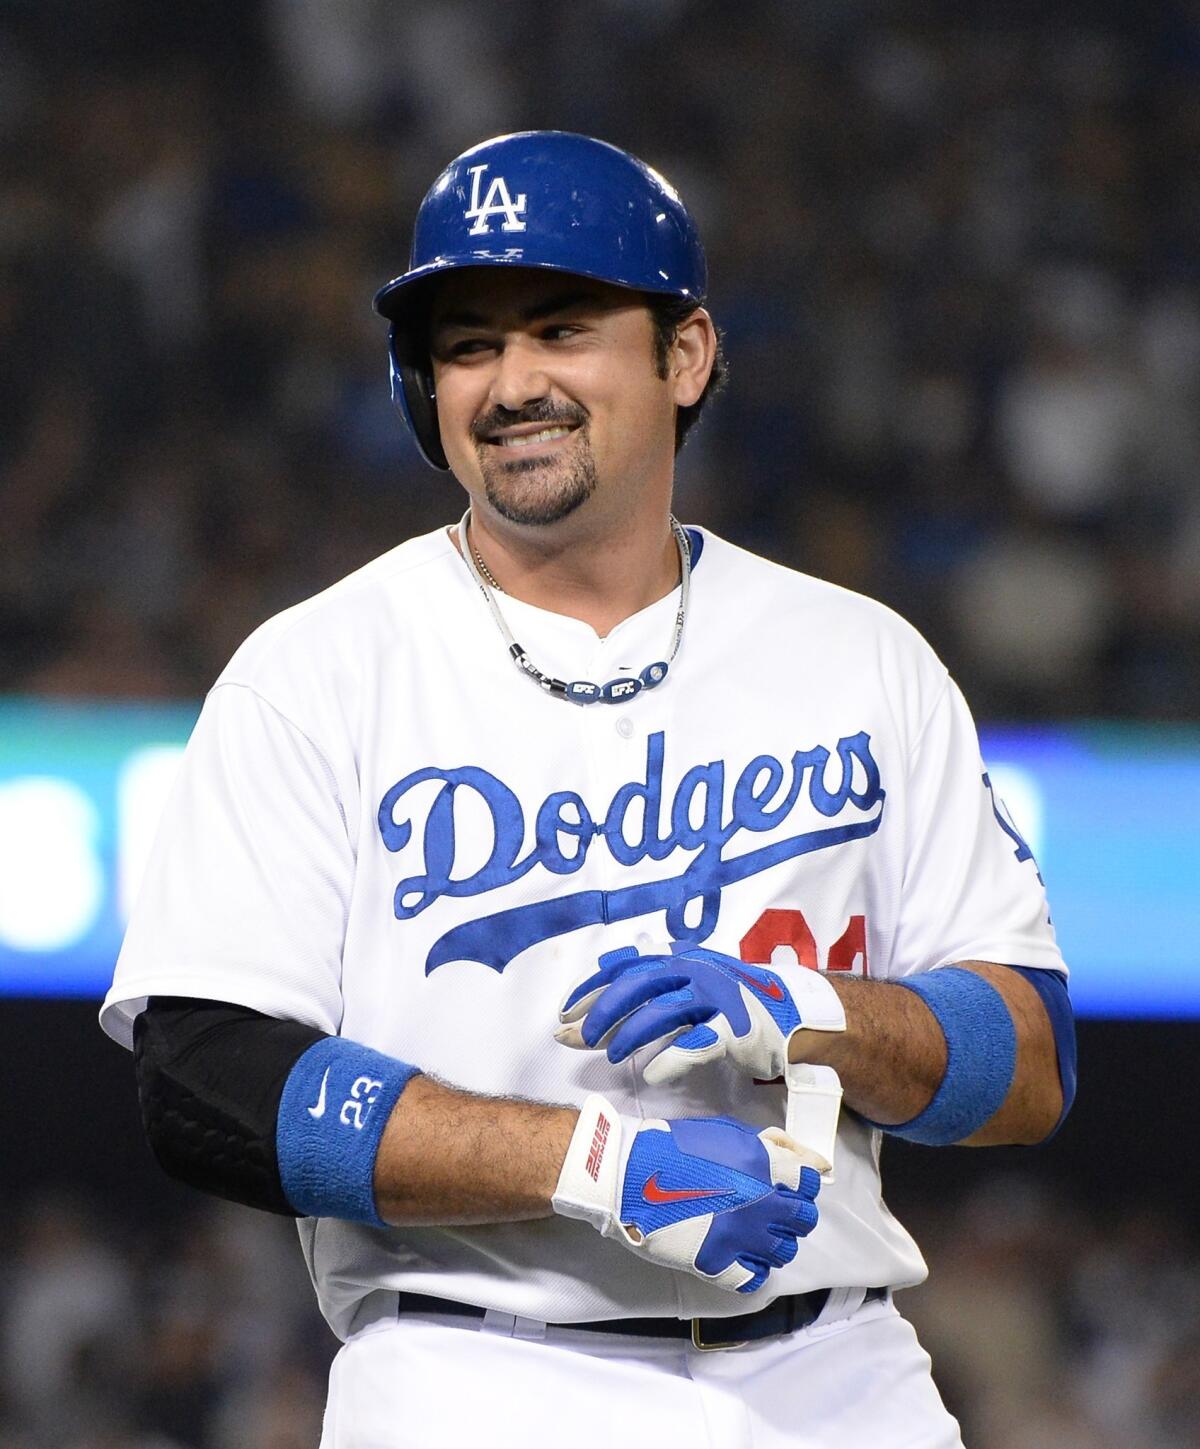 Dodgers first baseman Adrian Gonzalez didn't play in the team's 3-0 victory over the Chicago Cubs on Saturday.